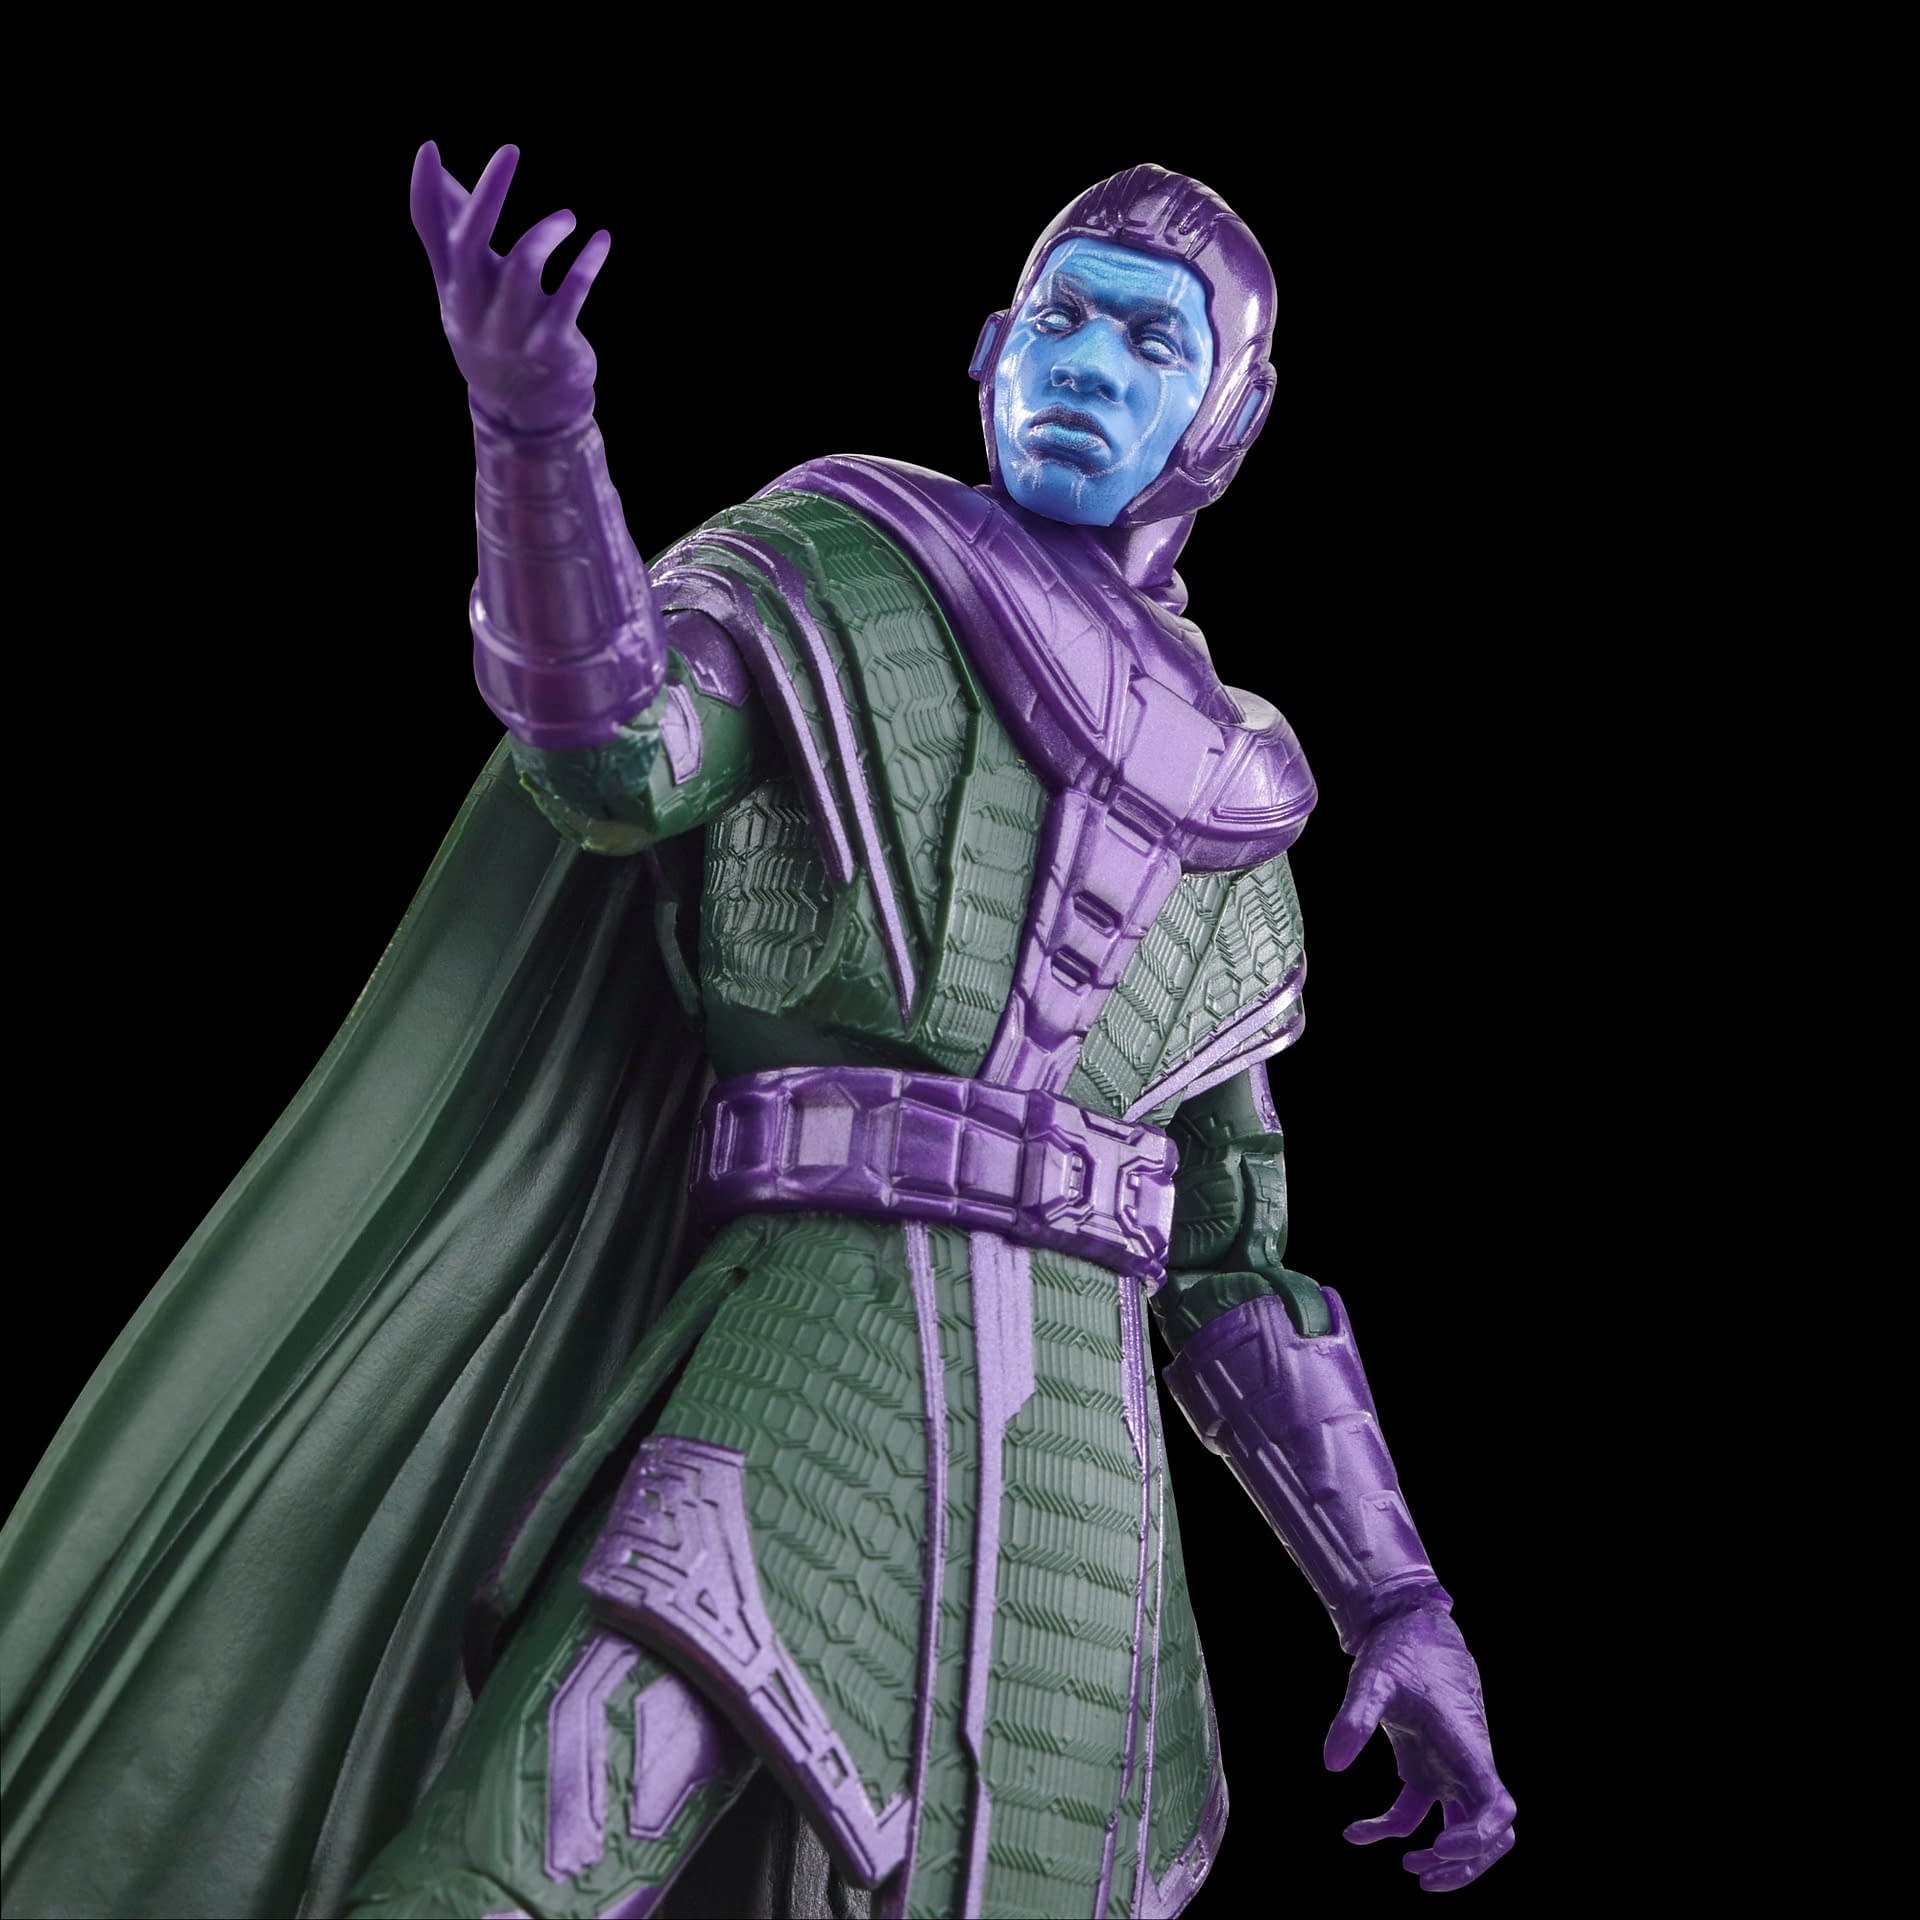 MCU Kang the Conqueror Comes to Life Hasbro's Marvel Legends 